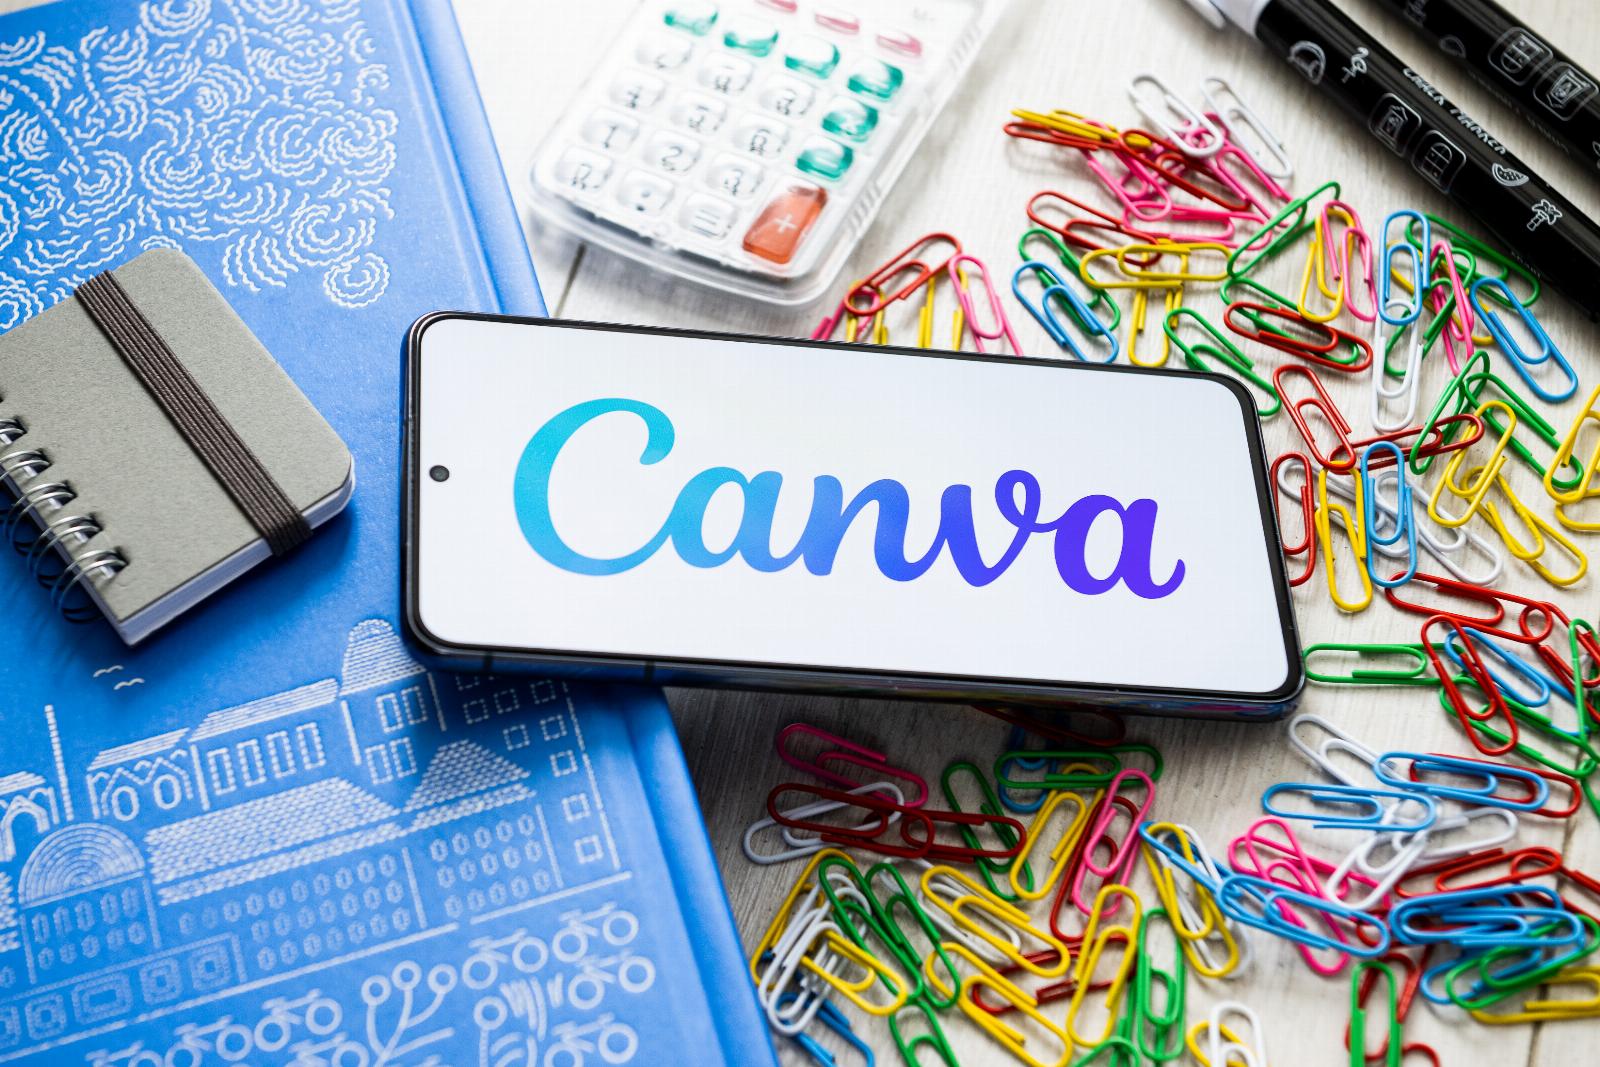 Canva unveils a series of new features, including several AI-powered tools